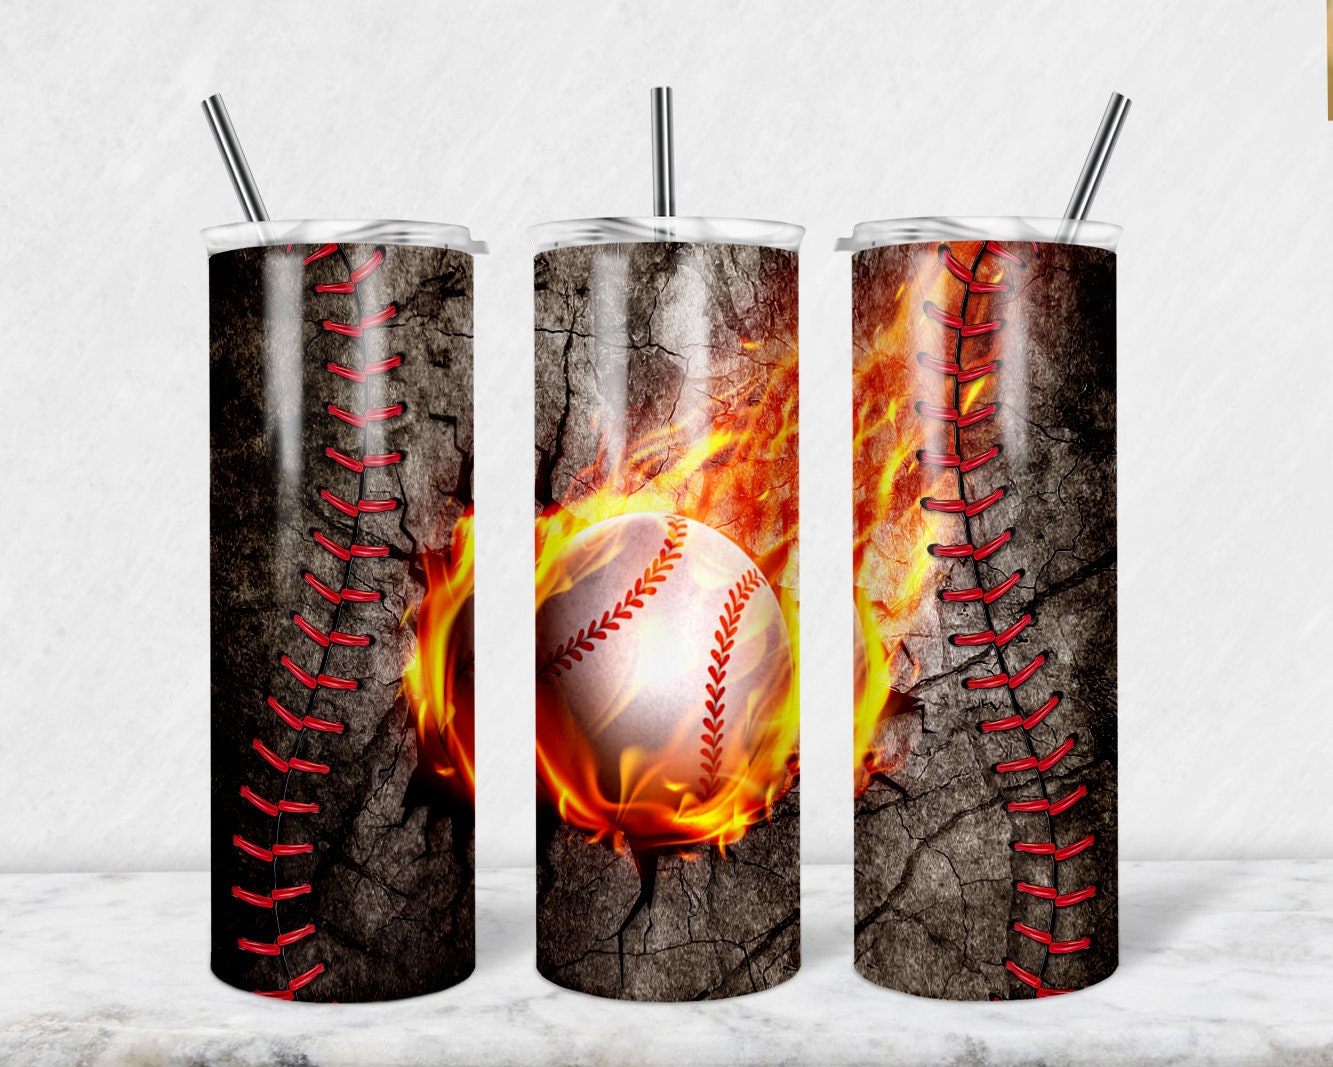 Baseball Mom Tumbler – Imperfectly Perfect Crafts